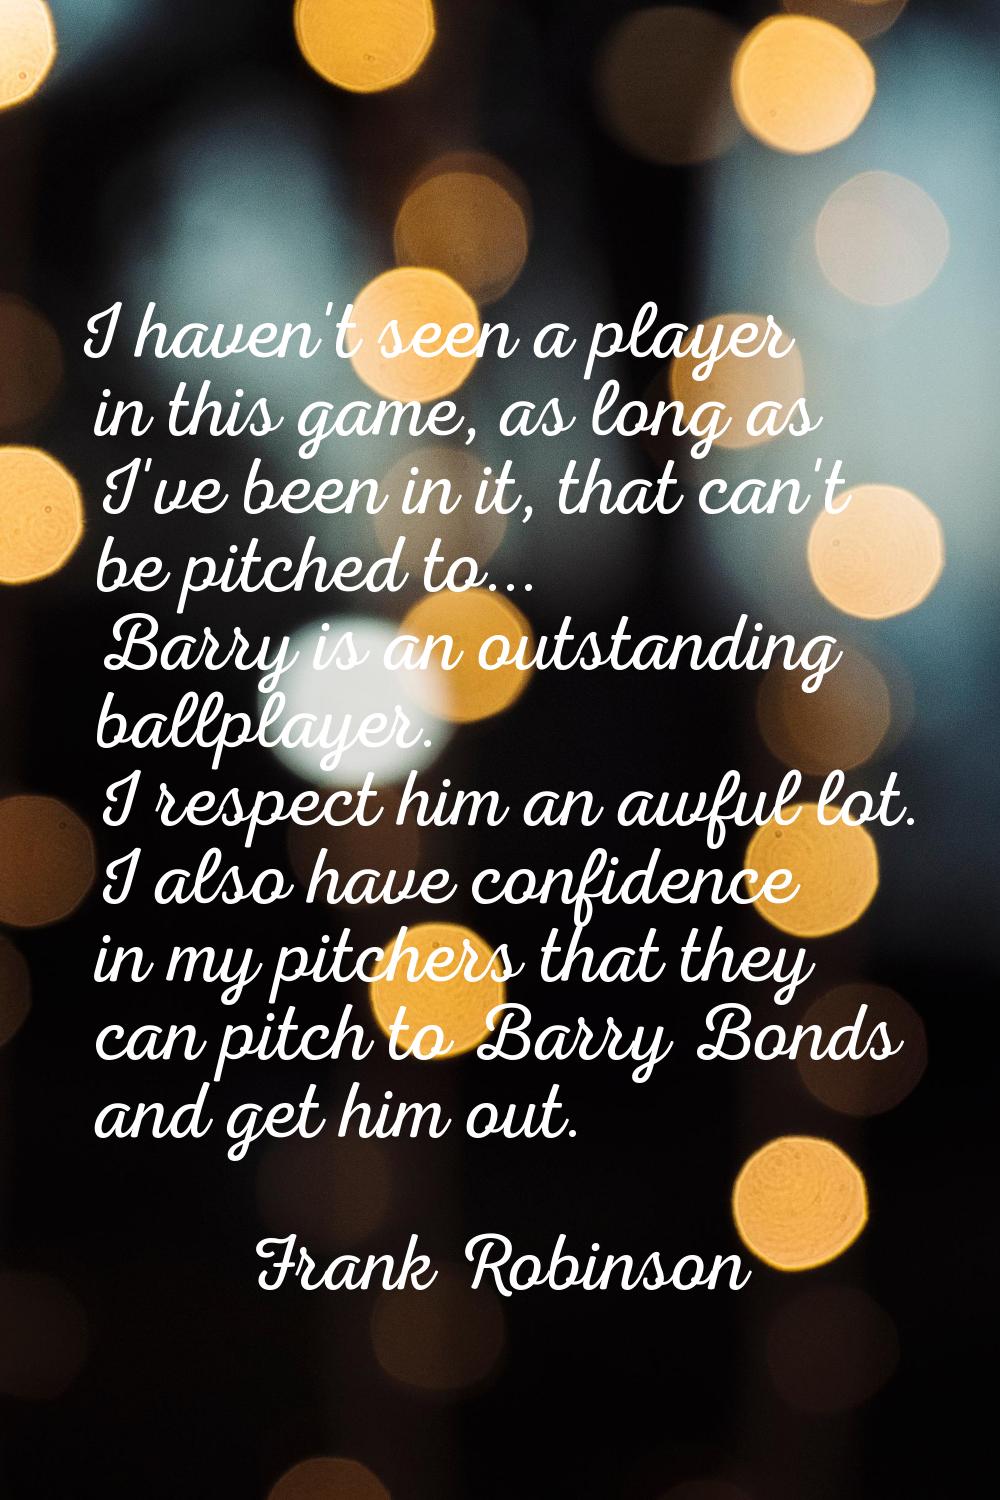 I haven't seen a player in this game, as long as I've been in it, that can't be pitched to... Barry